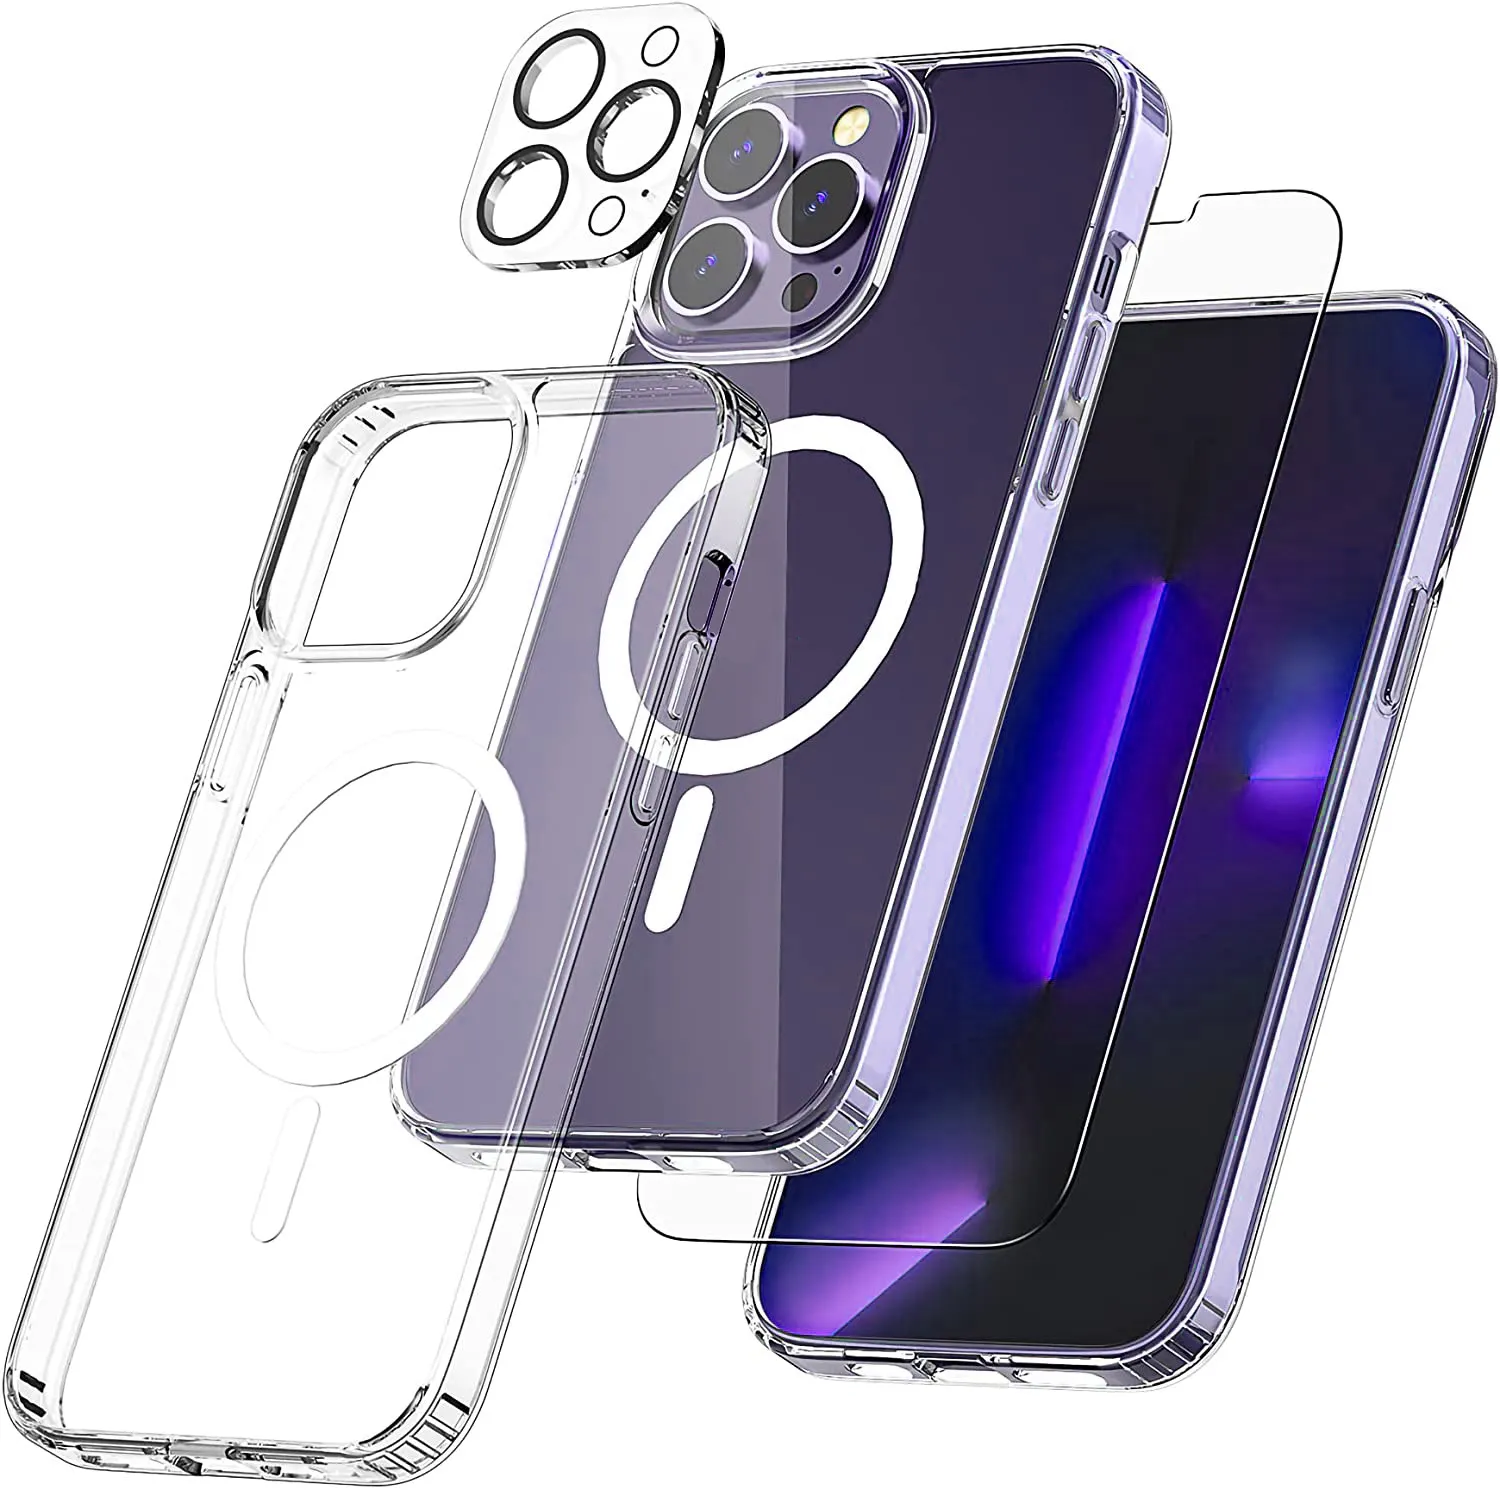 Transparent phone case set glass camera lens protector for 13 magsafe cover lens iphone 14 pro max case with screen protector